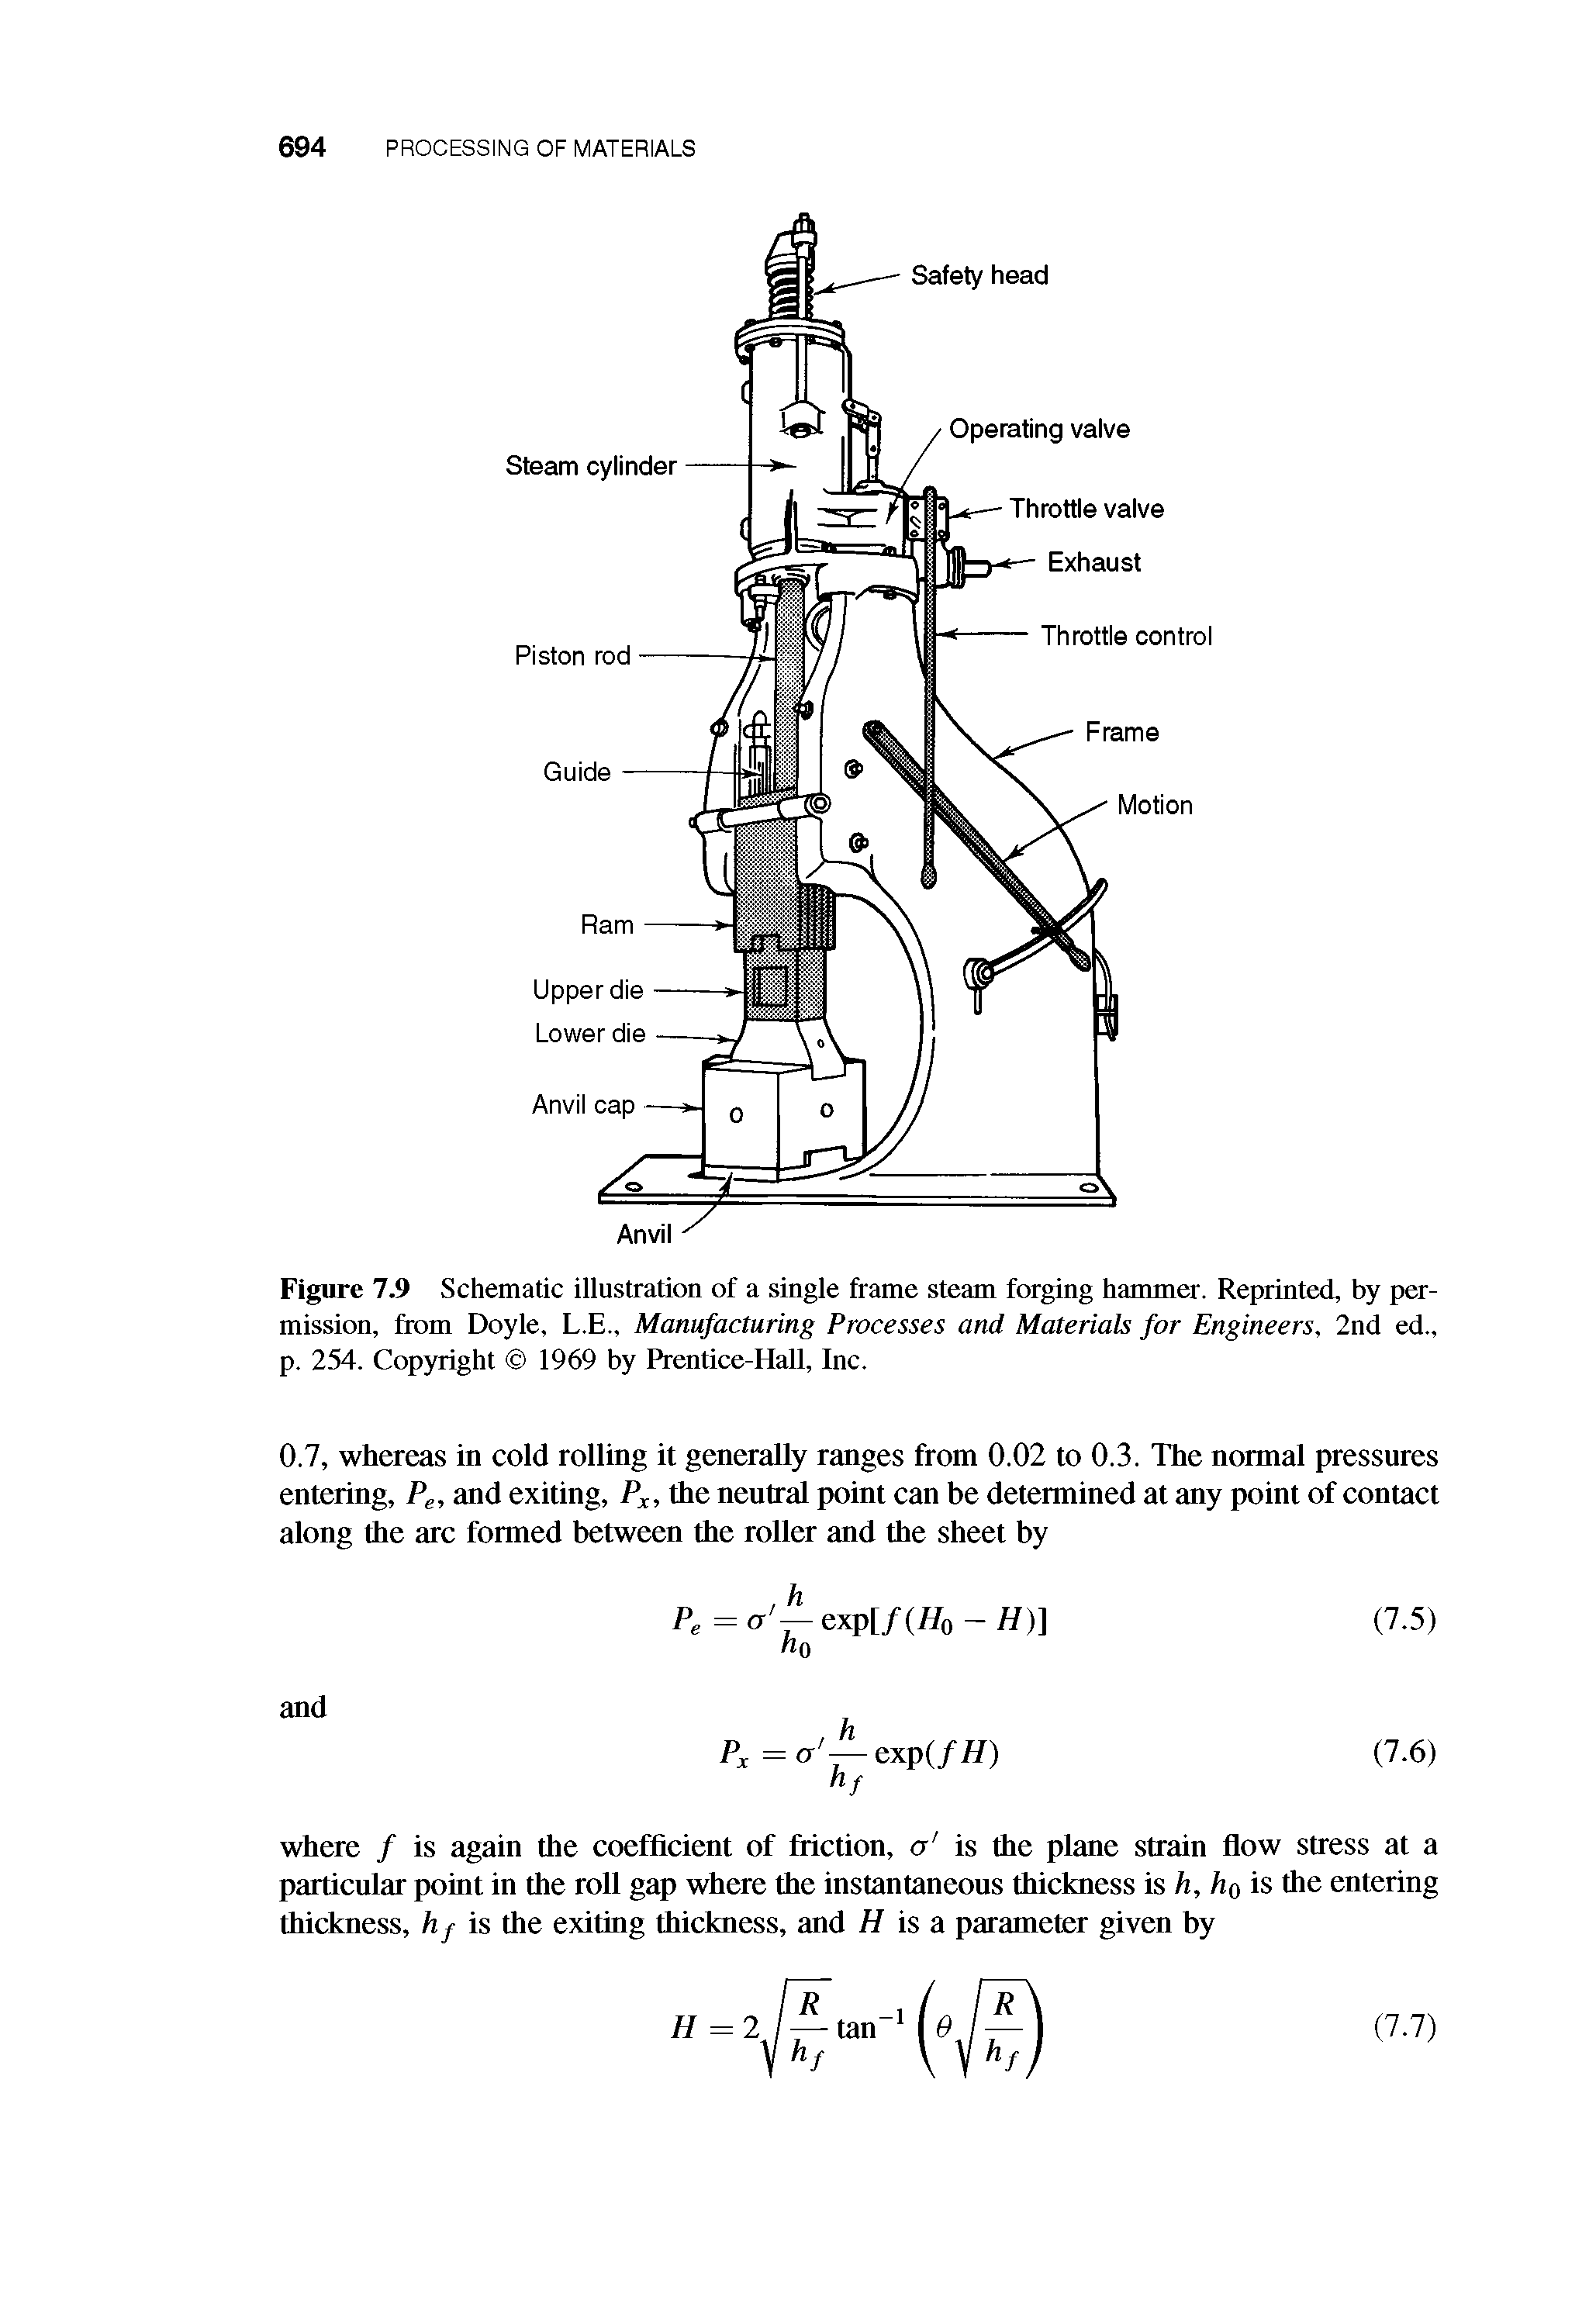 Figure 7.9 Schematic illustration of a single frame steam forging hammer. Reprinted, by permission, from Doyle, L.E., Manufacturing Processes and Materials for Engineers, 2nd ed., p. 254. Copyright 1969 by Prentice-Hall, Inc.